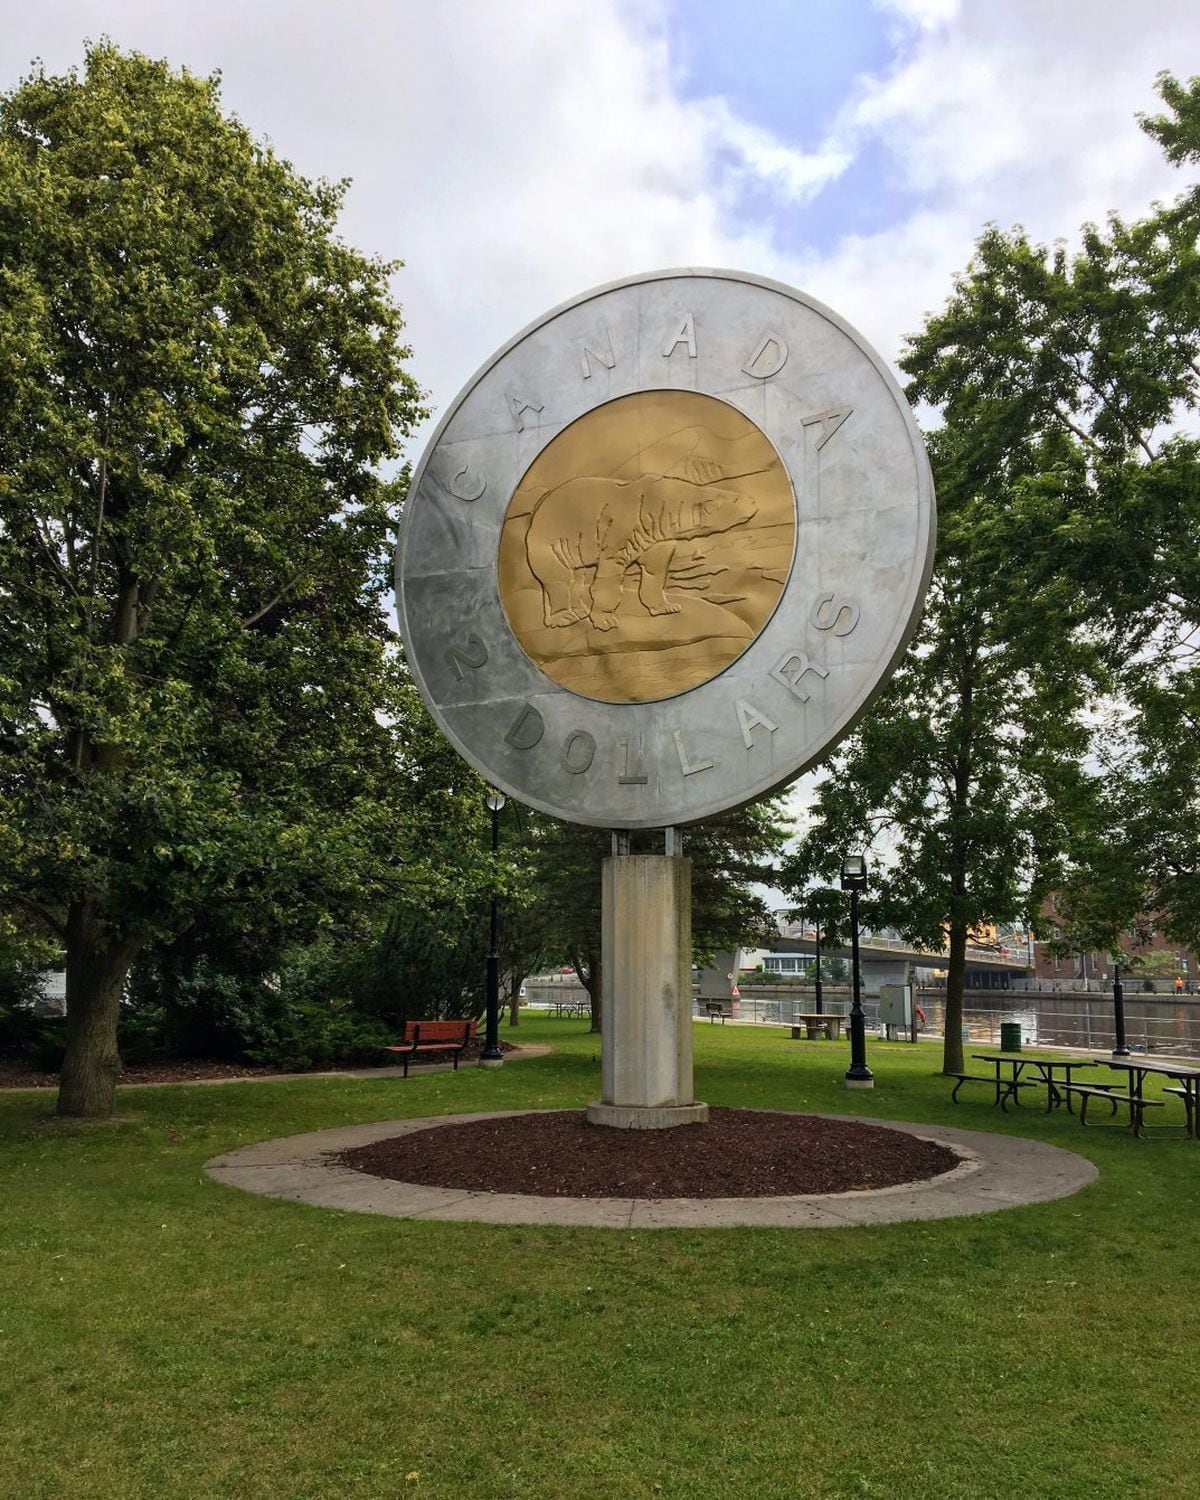 The giant toonie is a top tourist stop